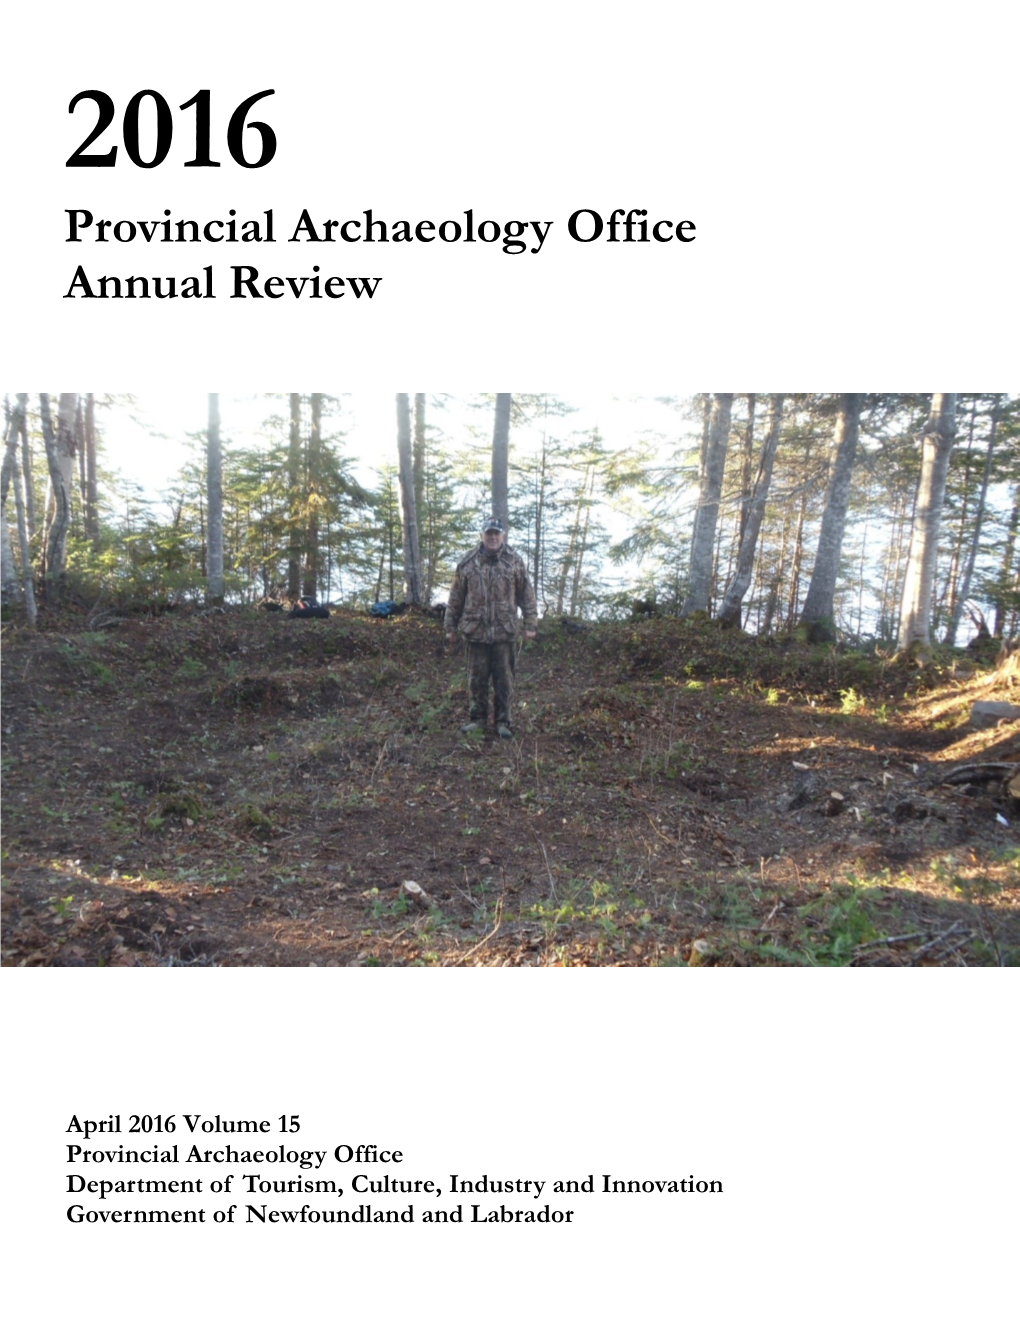 Provincial Archaeology Office Annual Review